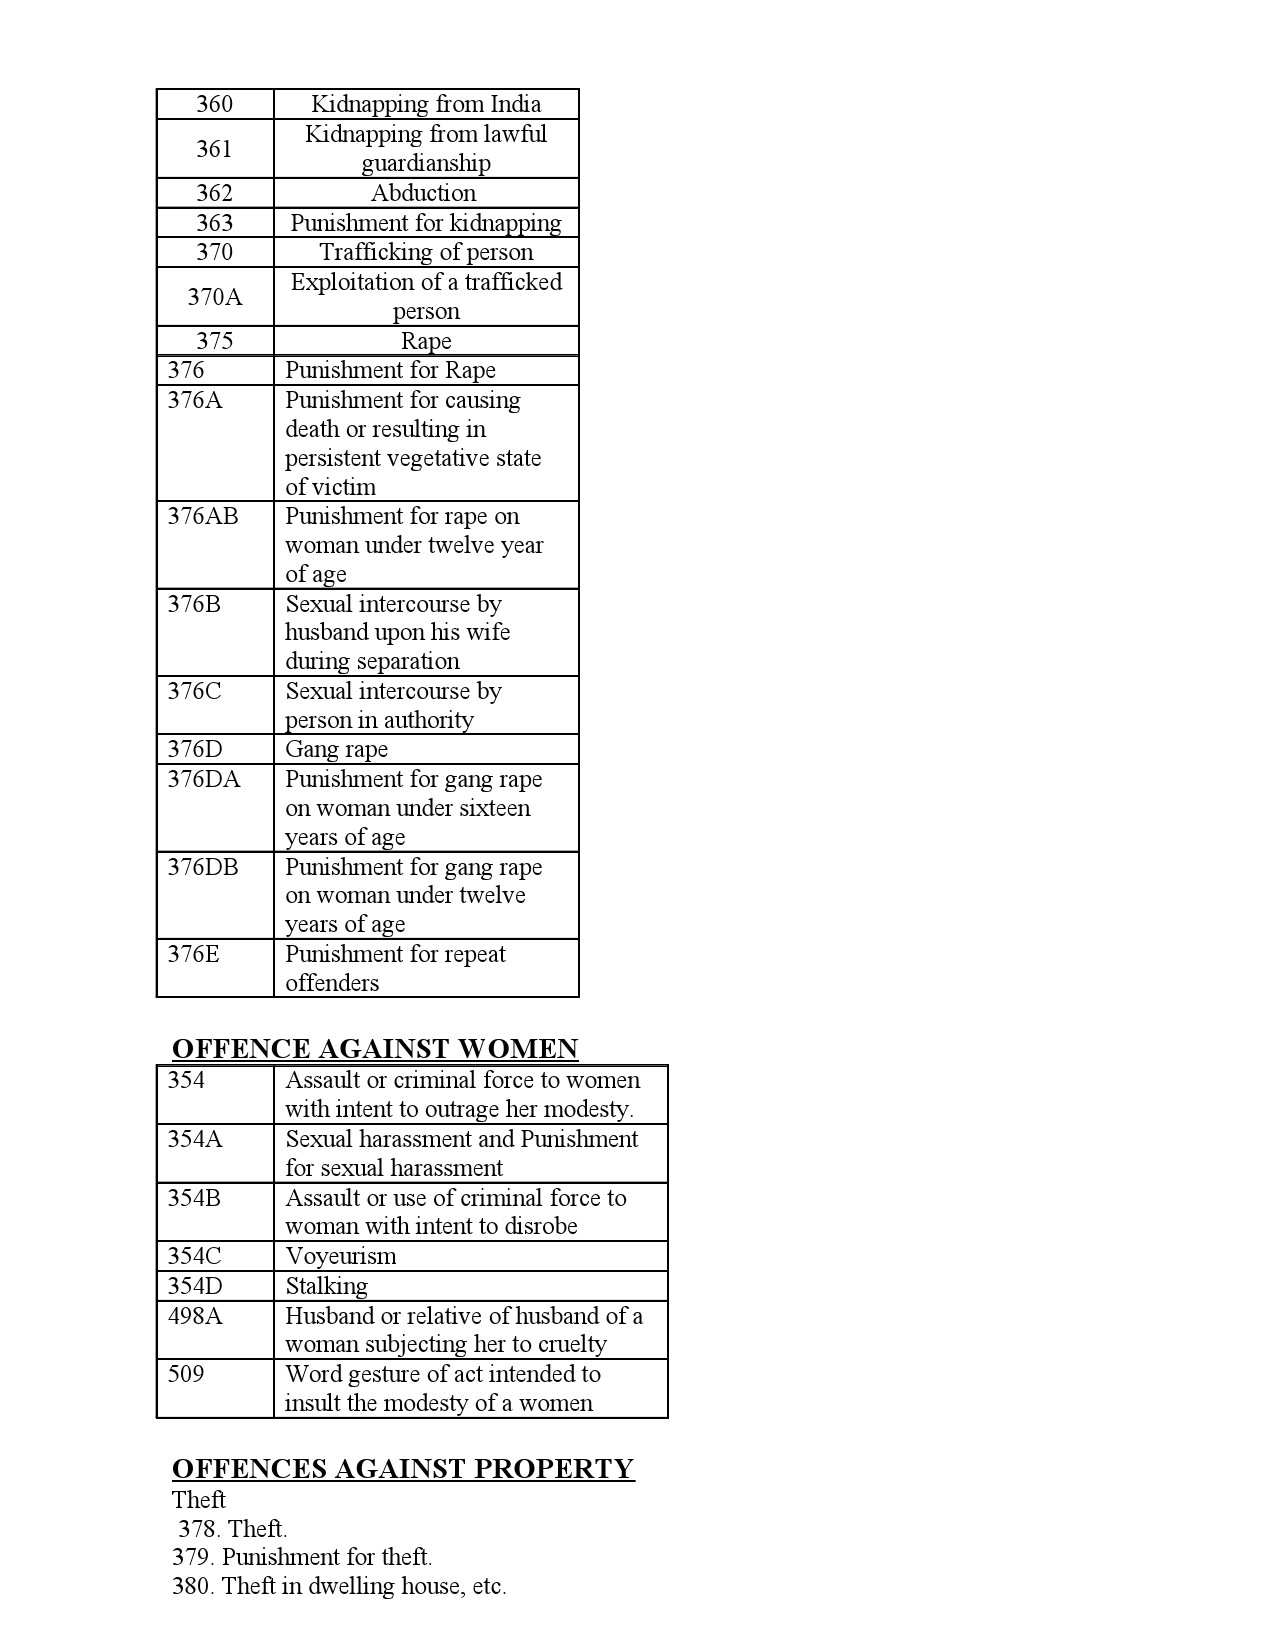 Civil Police Officer Final Examination Syllabus For Plus Two Level - Notification Image 13